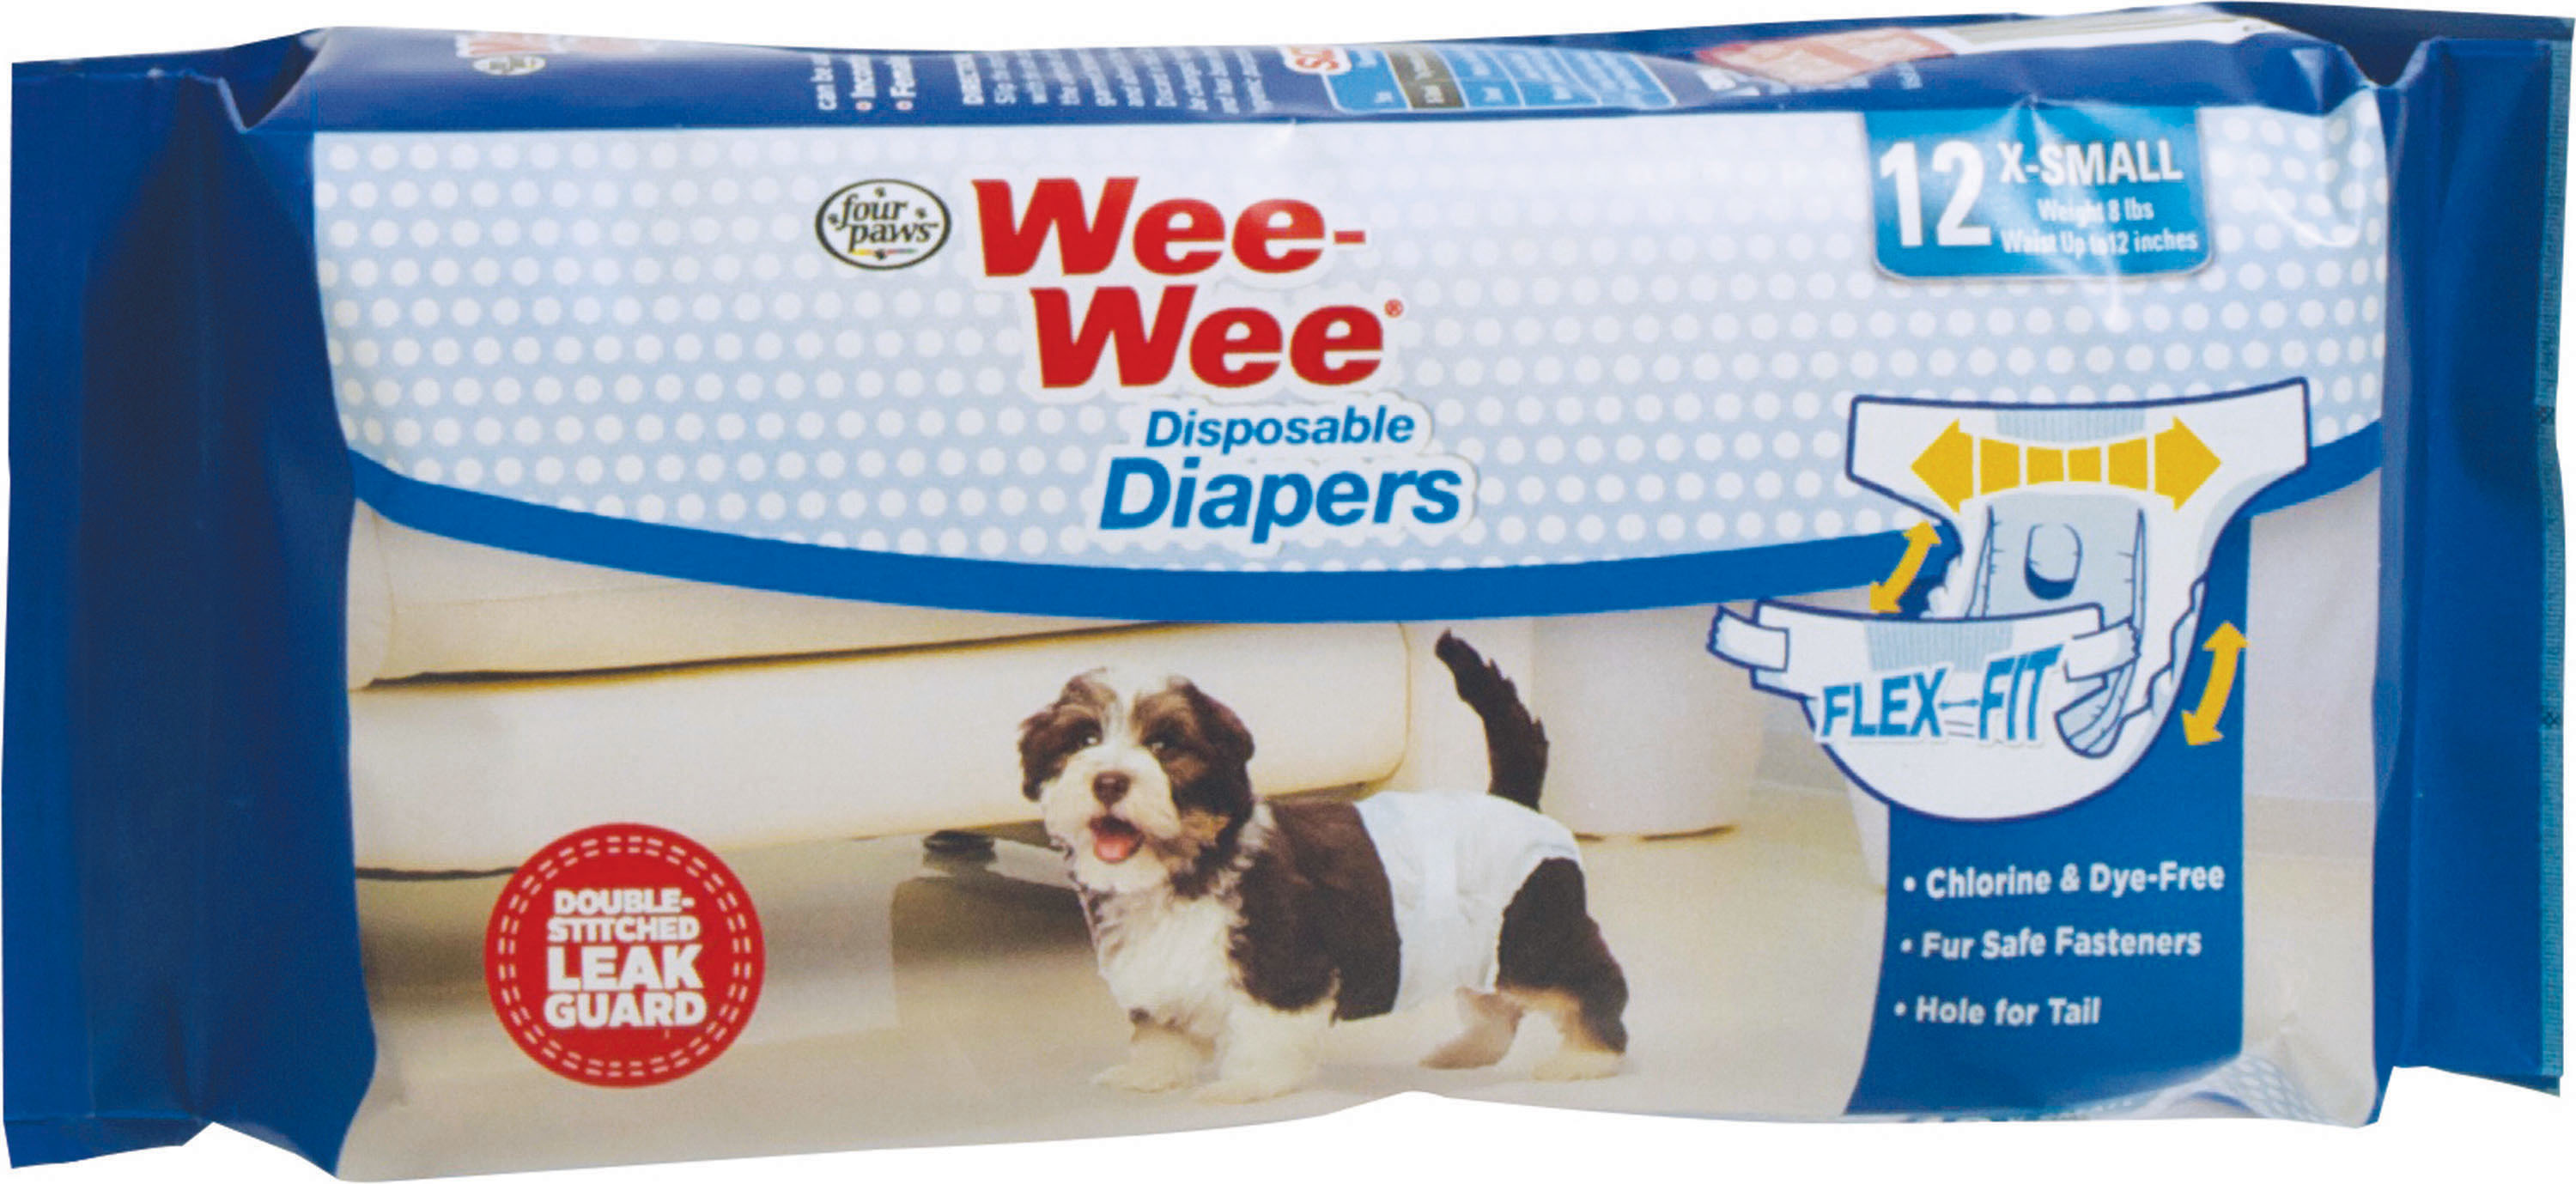 Wee-wee Disposable Diapers (Option 1: Extra Small)